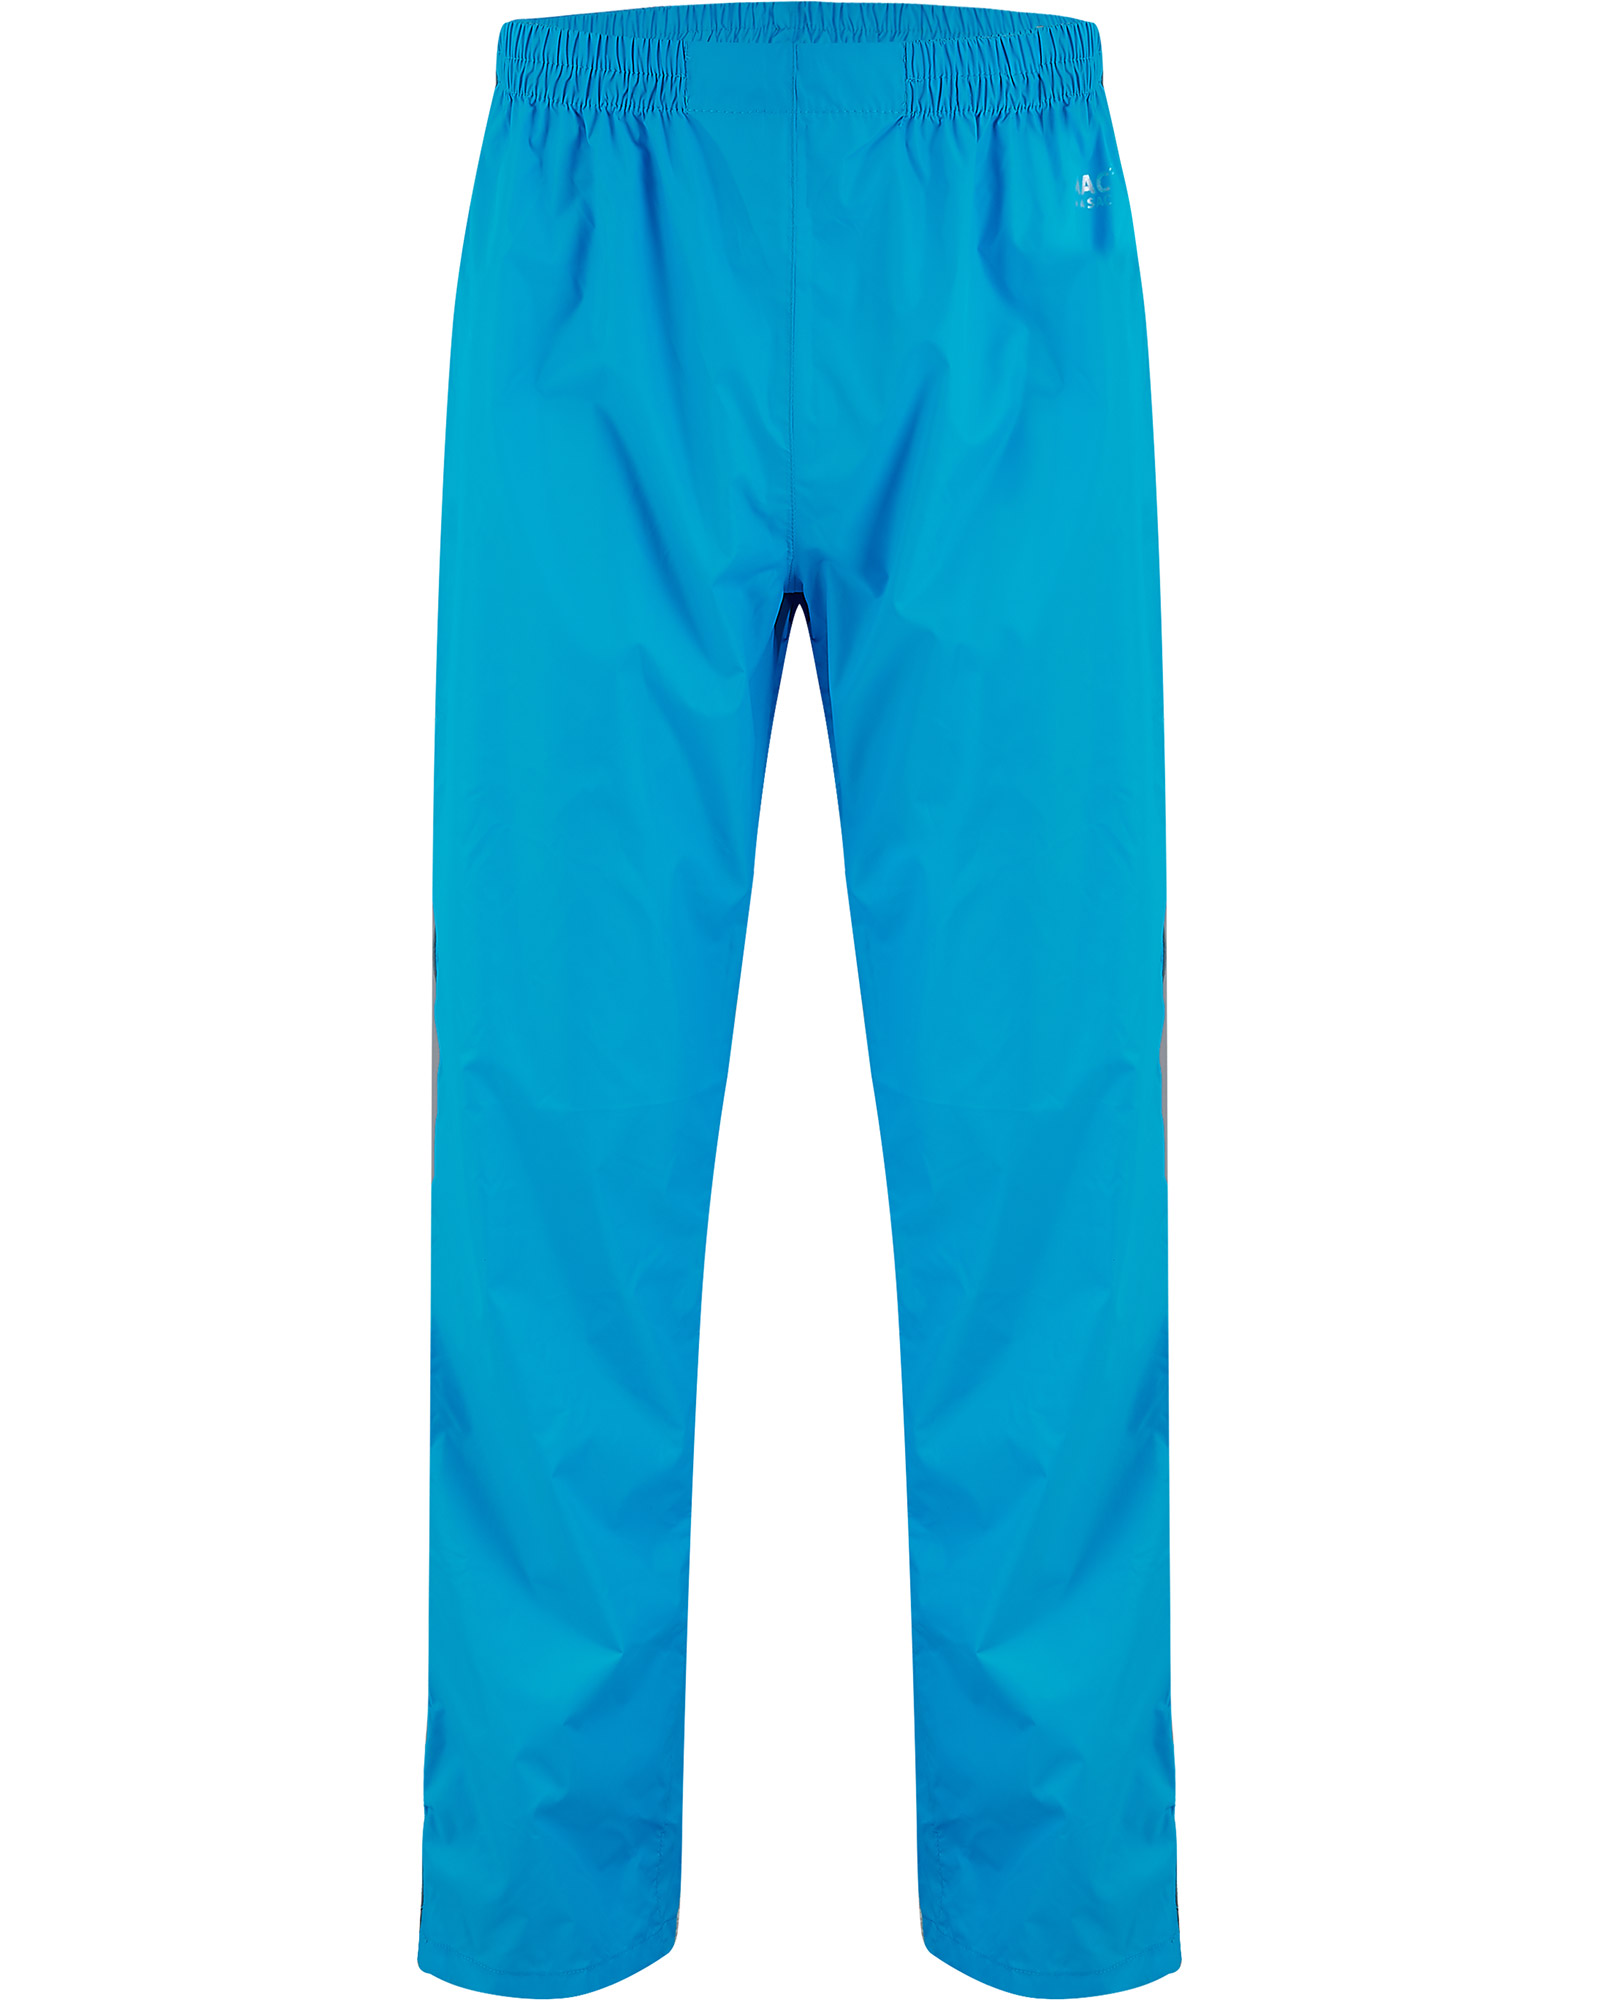 Target Dry Mac in a Sac Adult Full Zip Packable Waterproof Overtrousers - Neon Blue XL